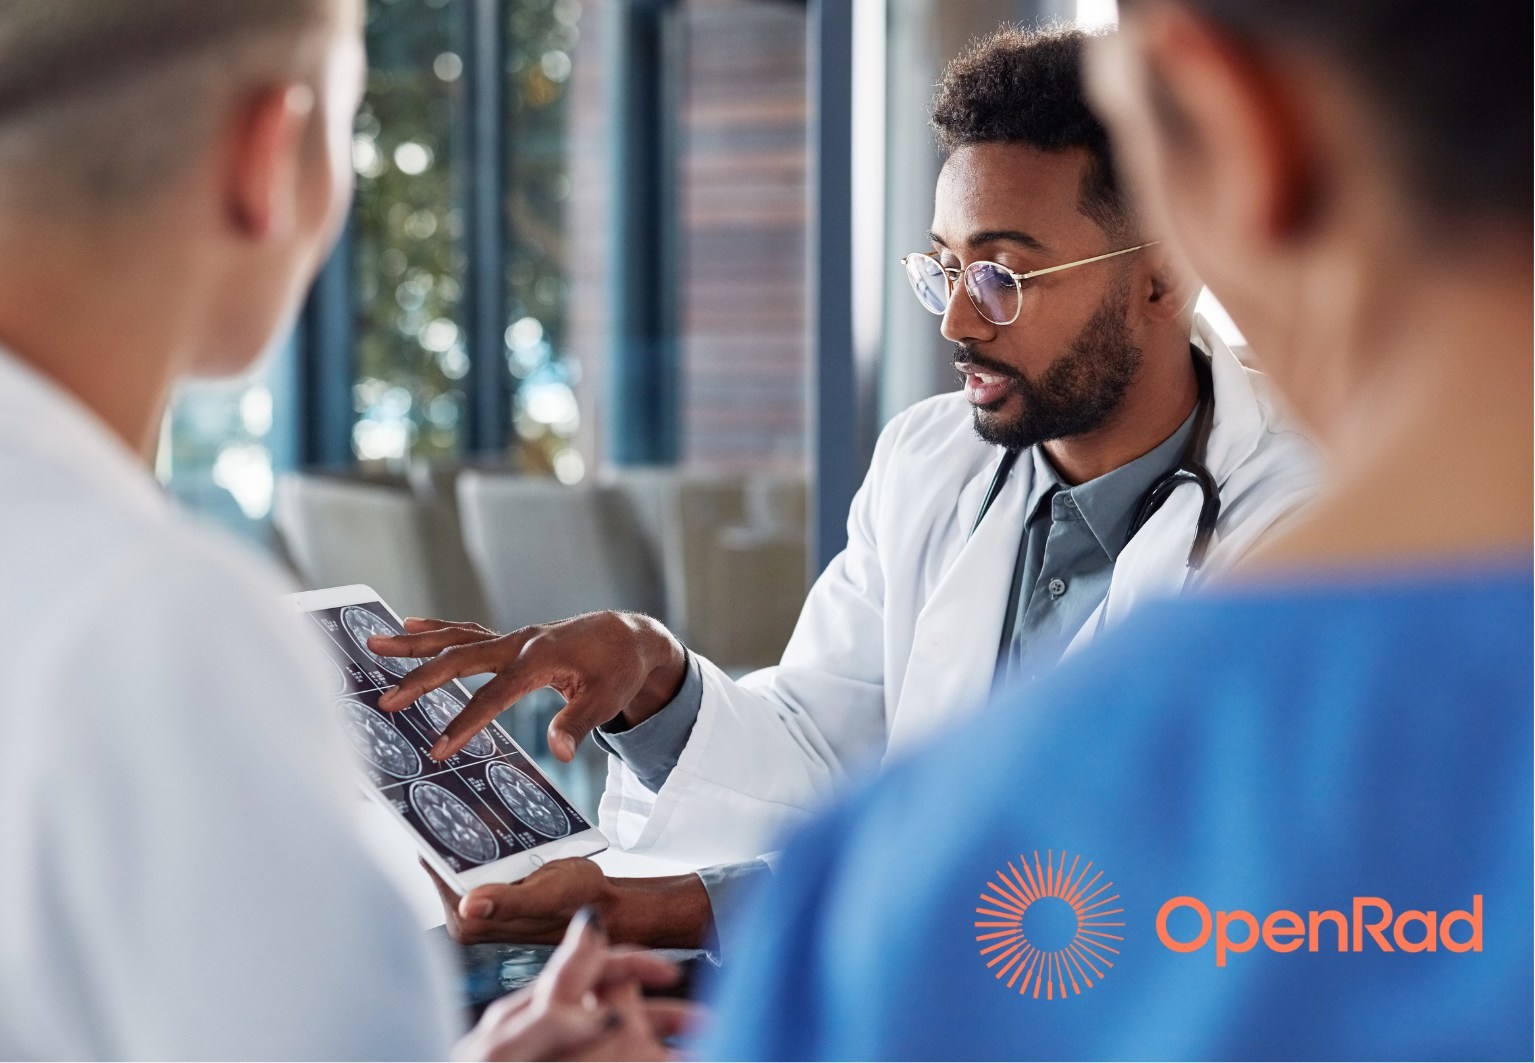 Radiology Tech Firm OpenRad Launches Enterprise Remote Reporting Platform at RSNA